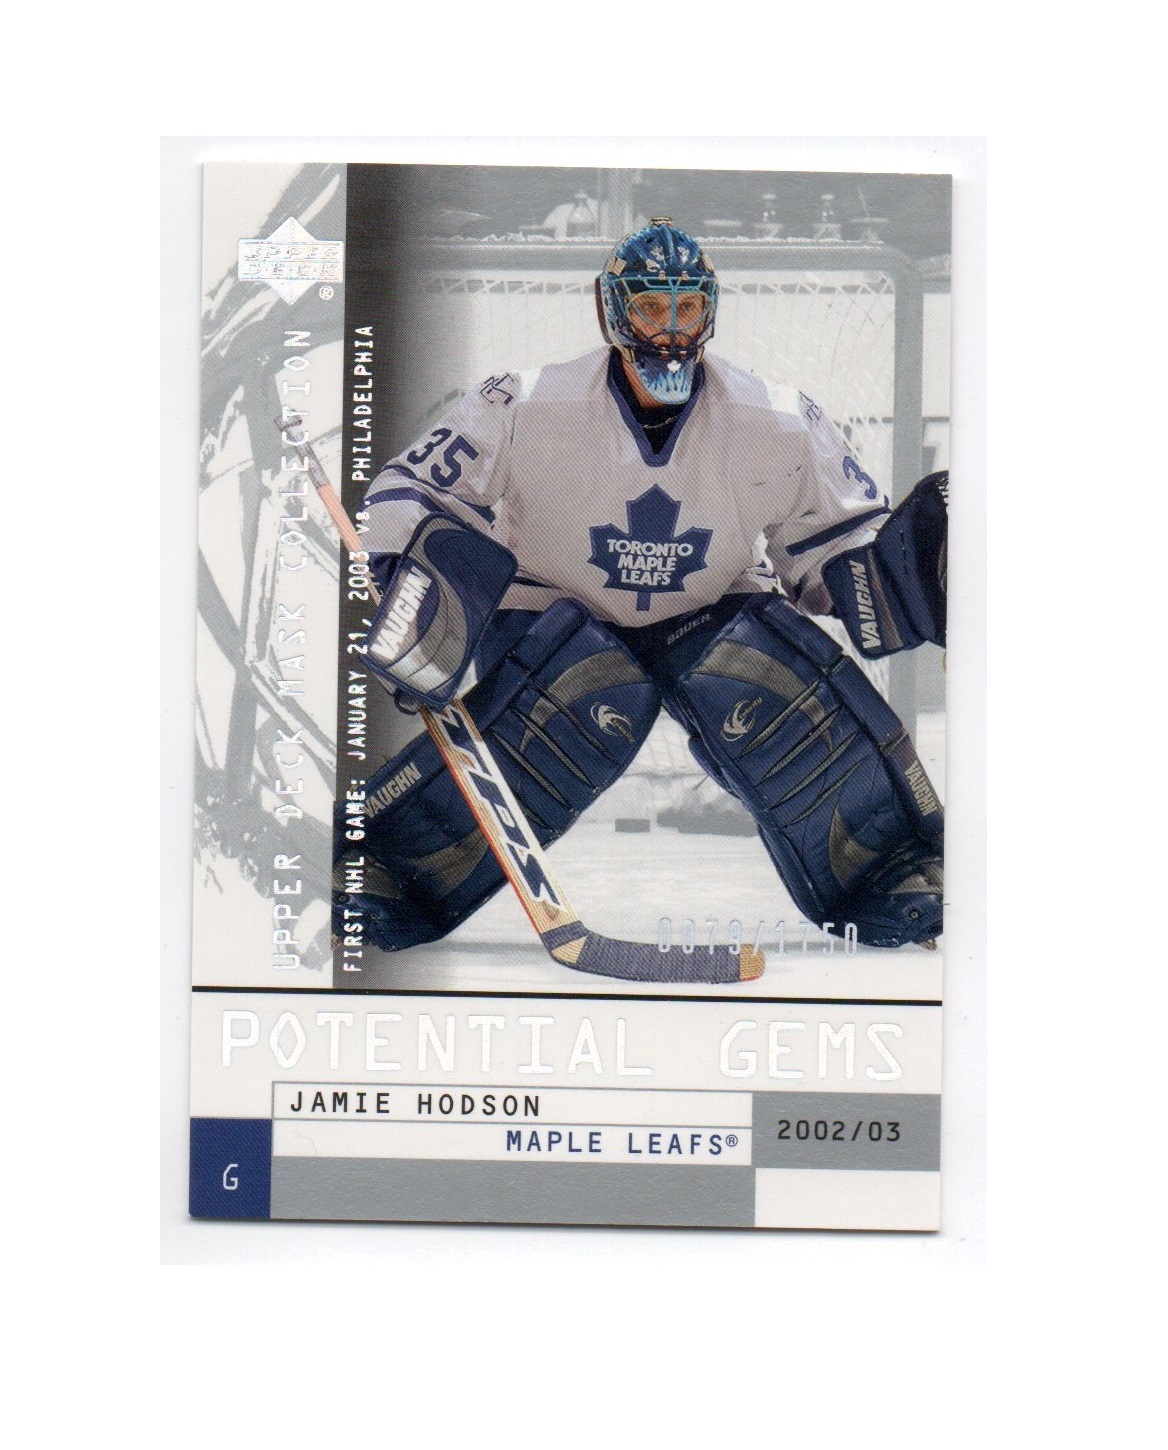 2002-03 UD Mask Collection #152 Jamie Hodson RC (10-X215-MAPLE LEAFS)